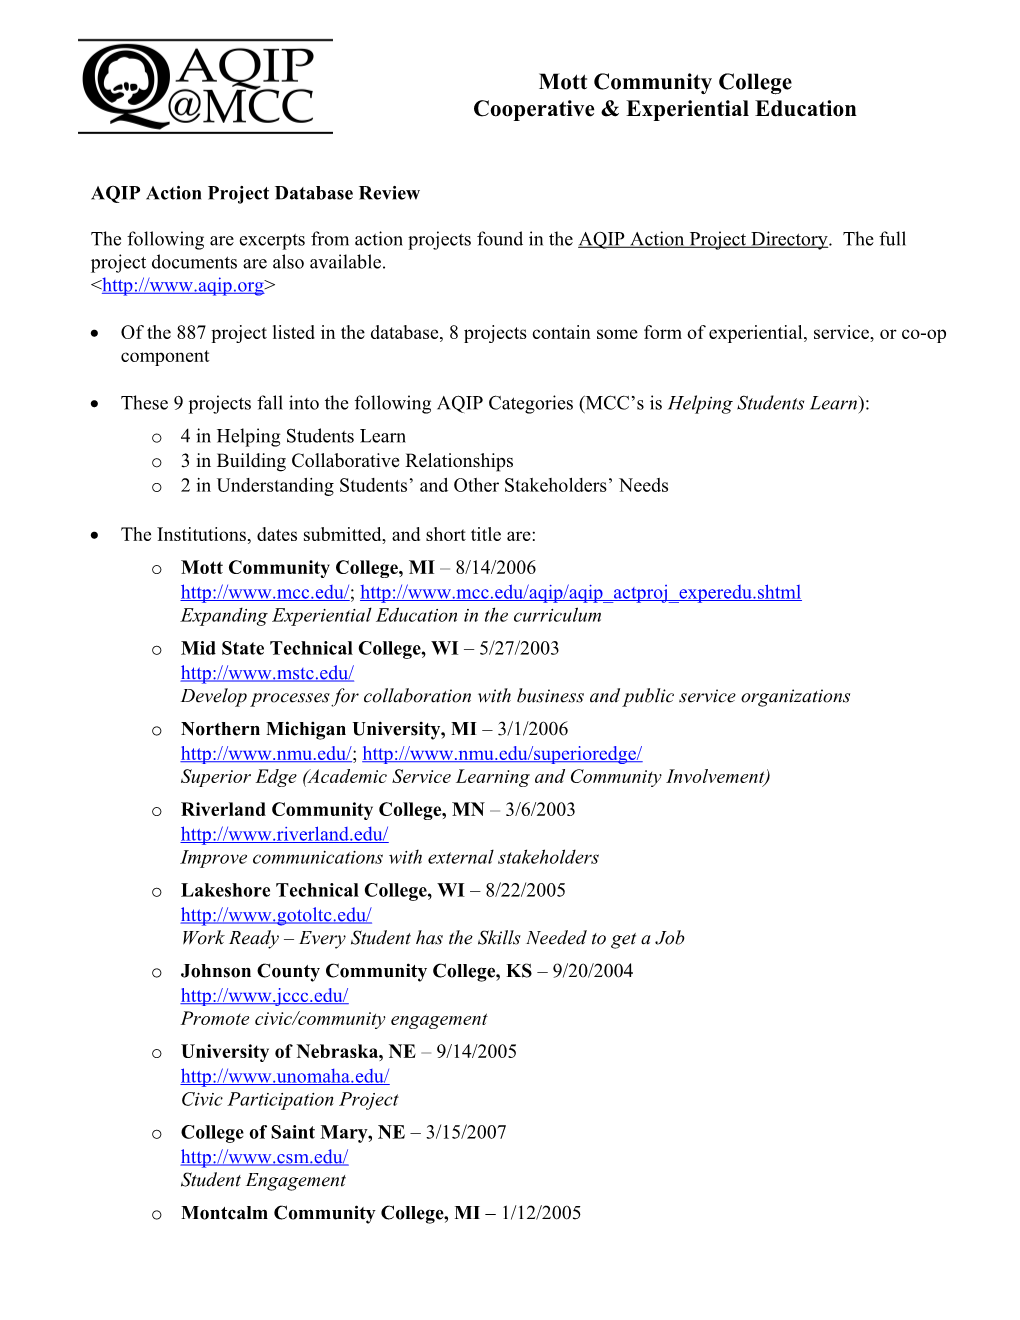 AQIP Action Project Database Review